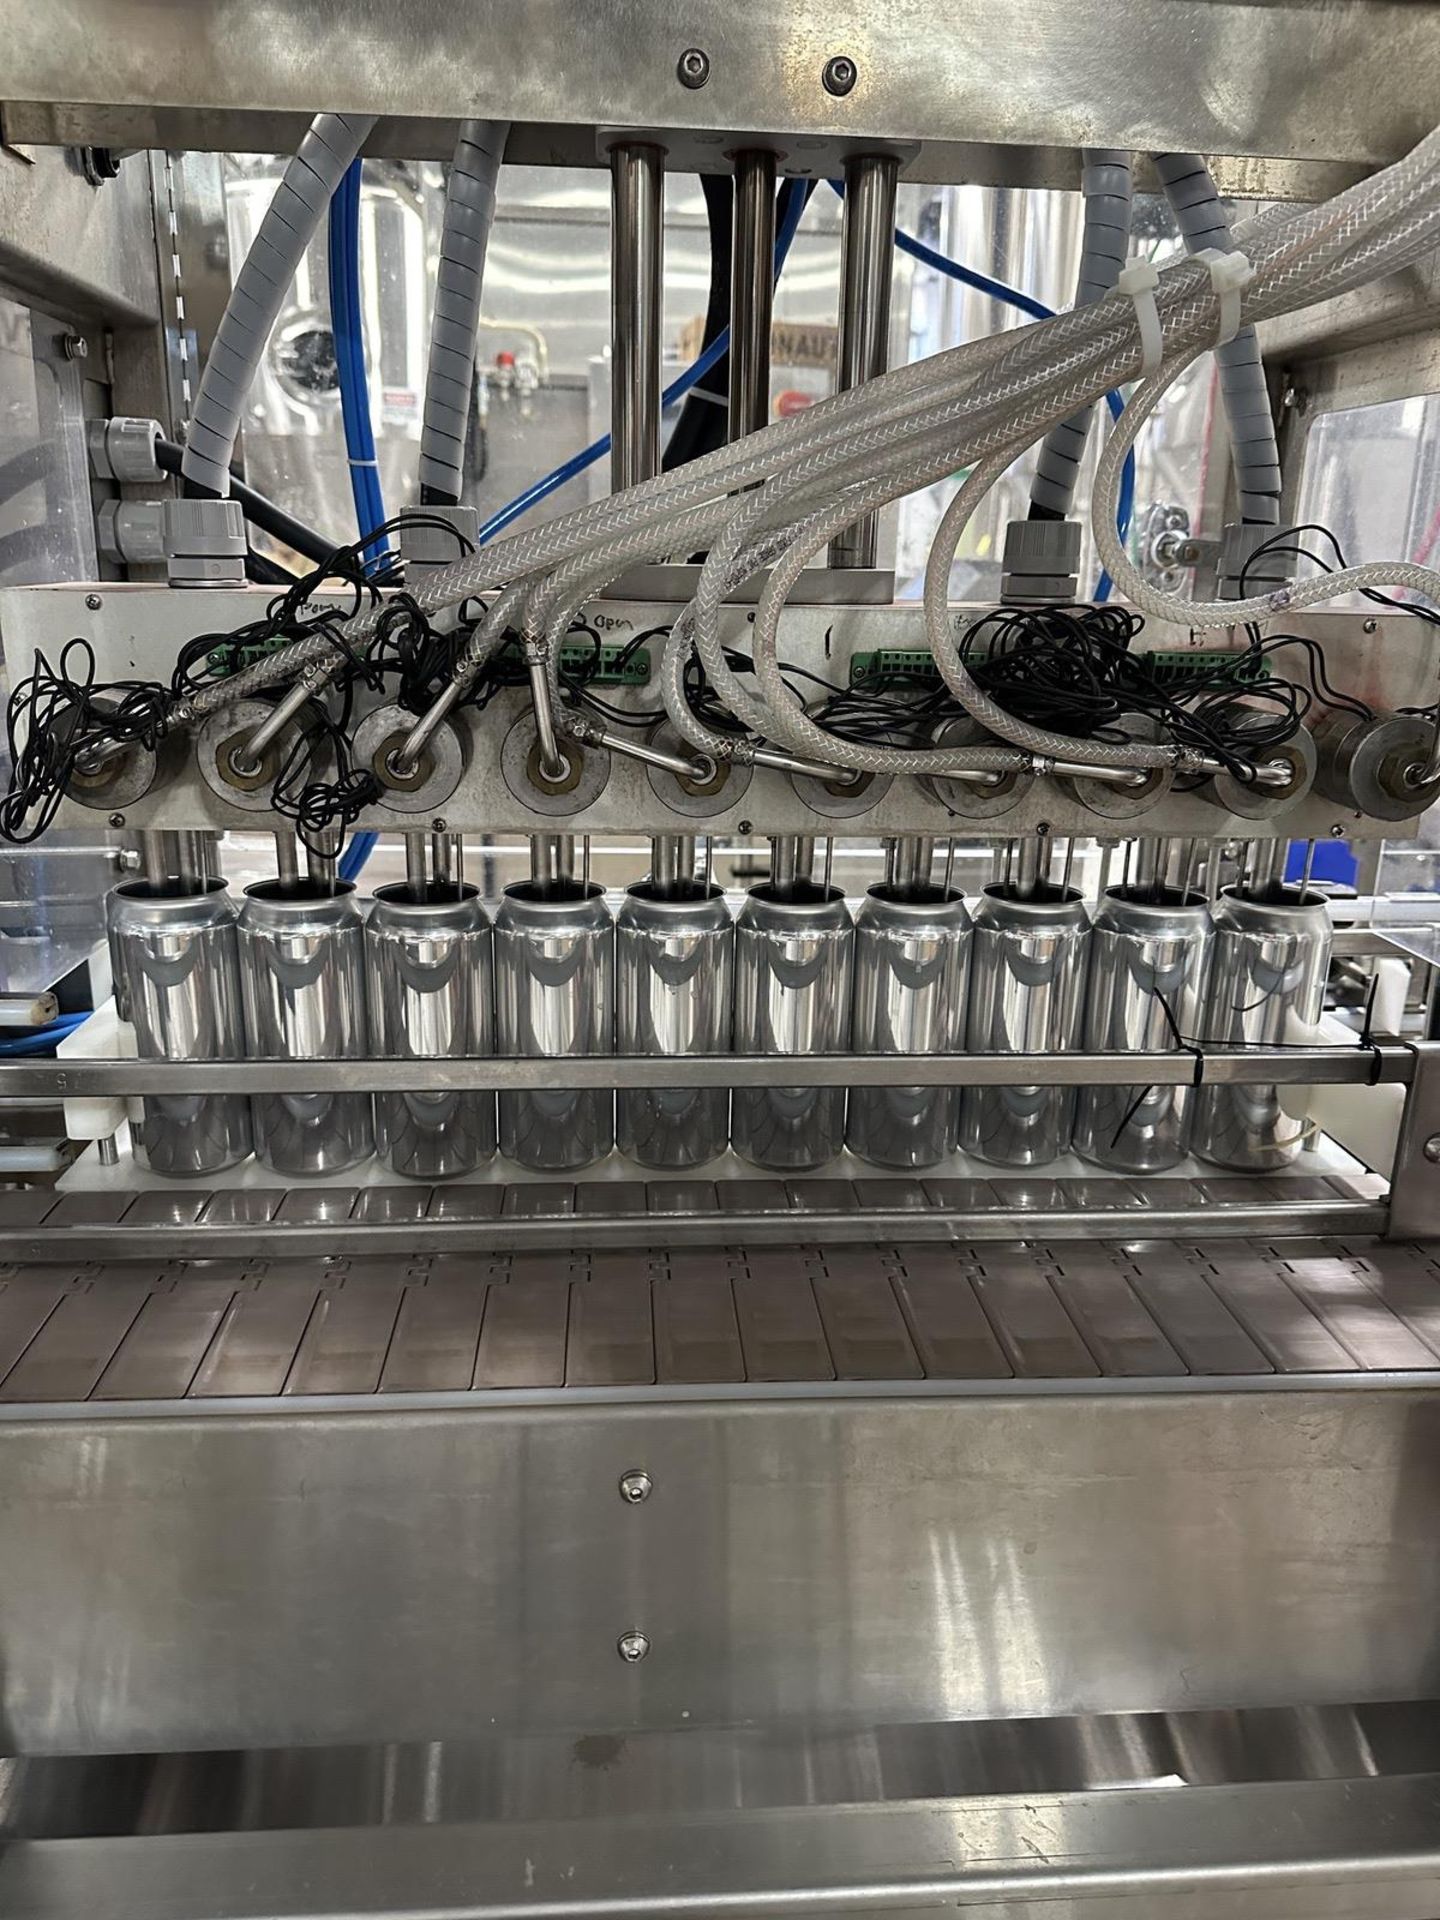 2018 Cask X2-100 10 Head 2 Seamer Can Filling System s/n X2017-026-18, Festo Contro | Rig Fee $1200 - Image 3 of 11